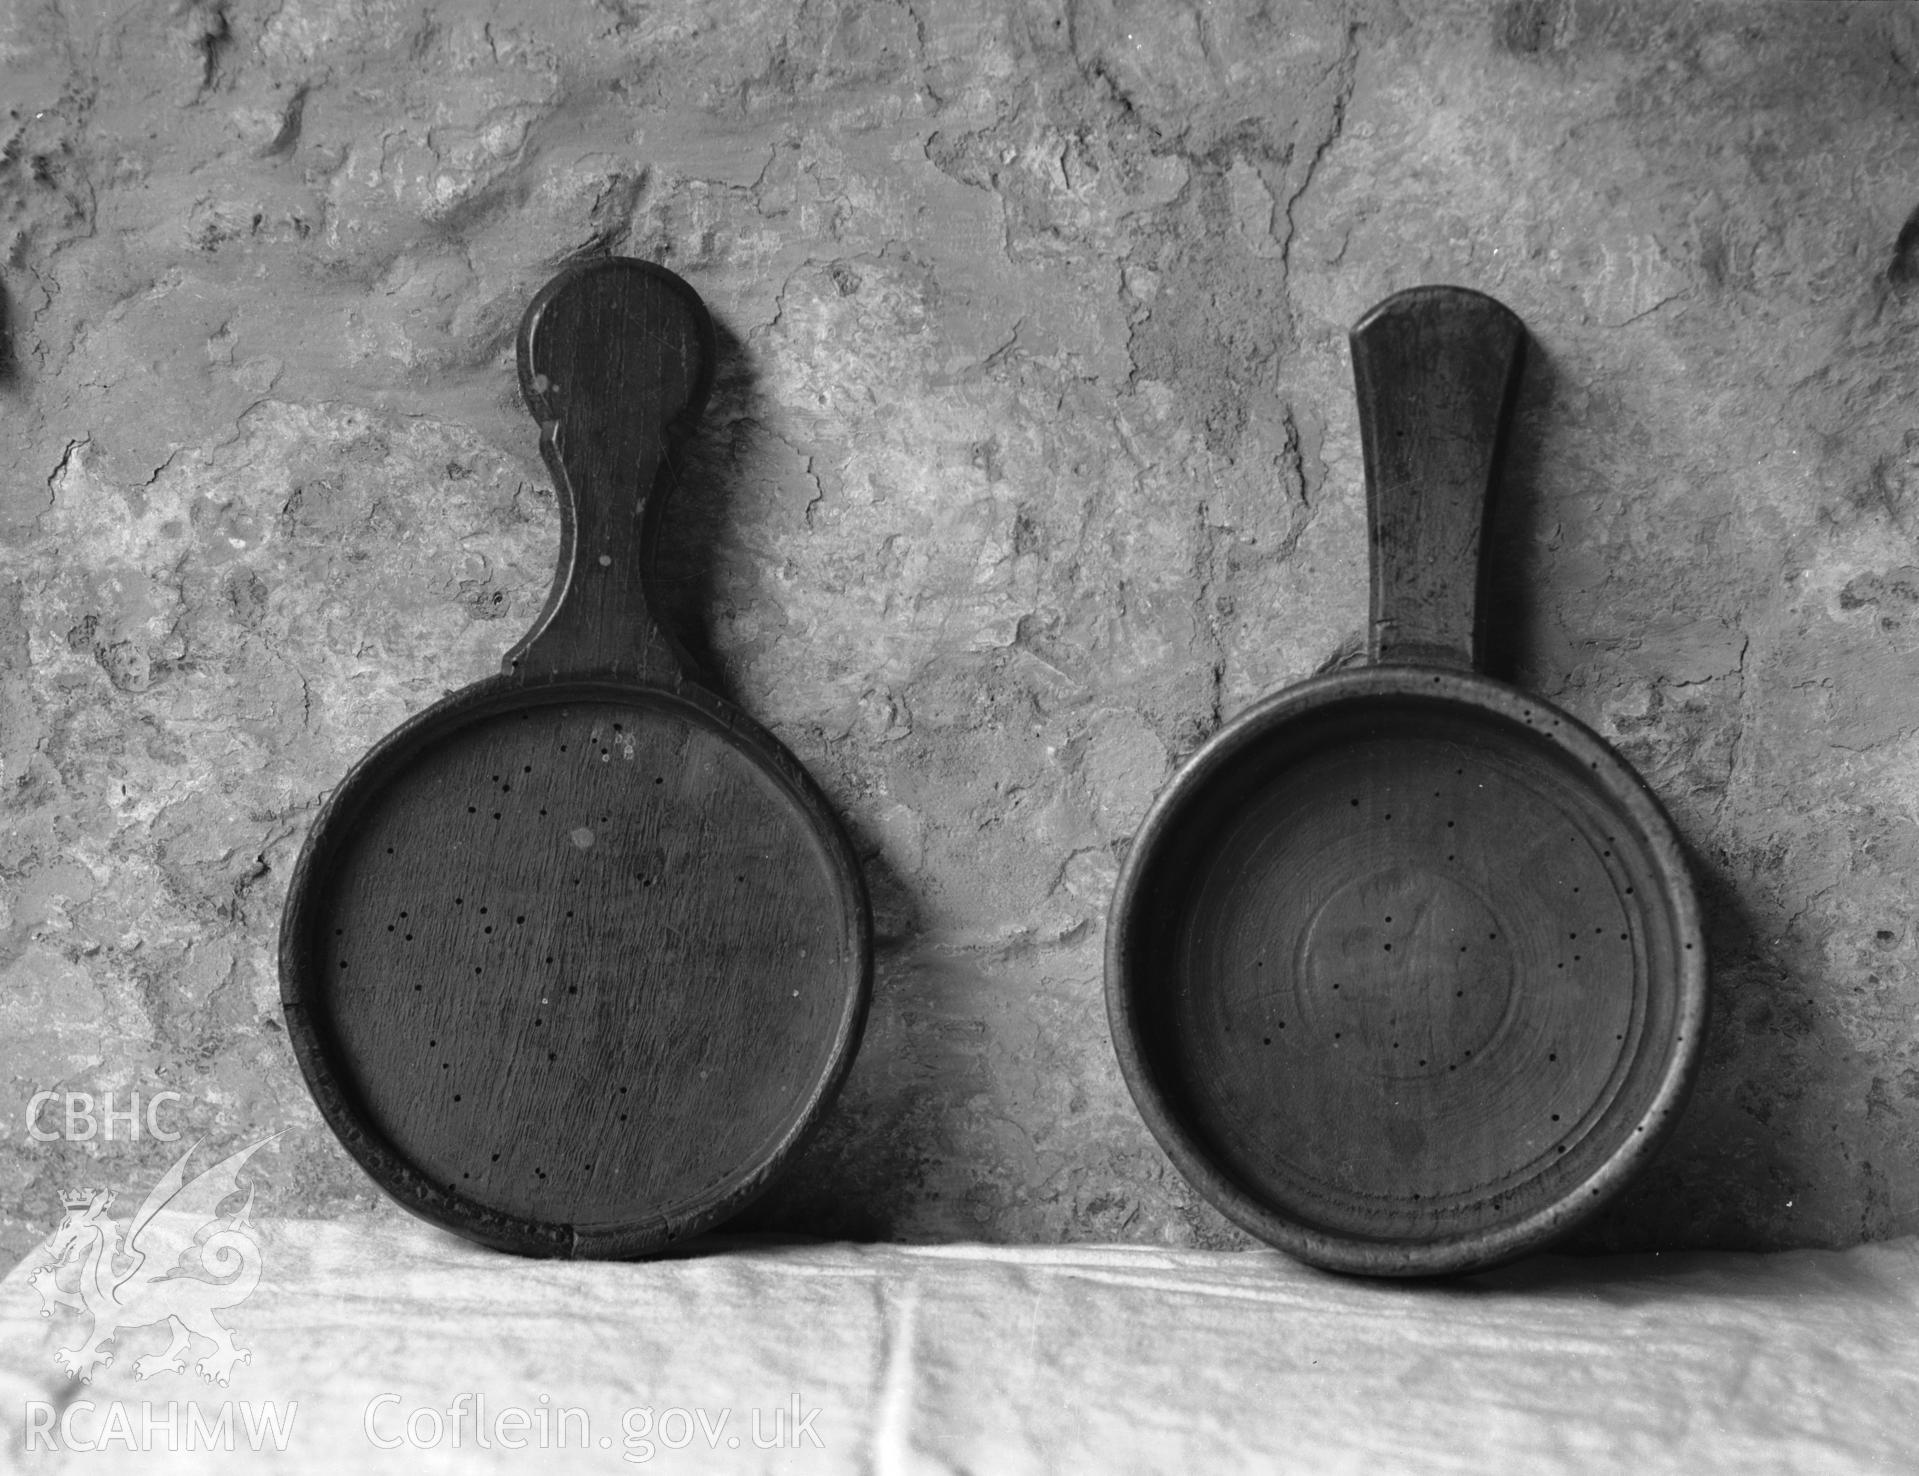 View of wooden collection plates at St Peters Church, Llanbedr y Cennin, taken 08.05.48.